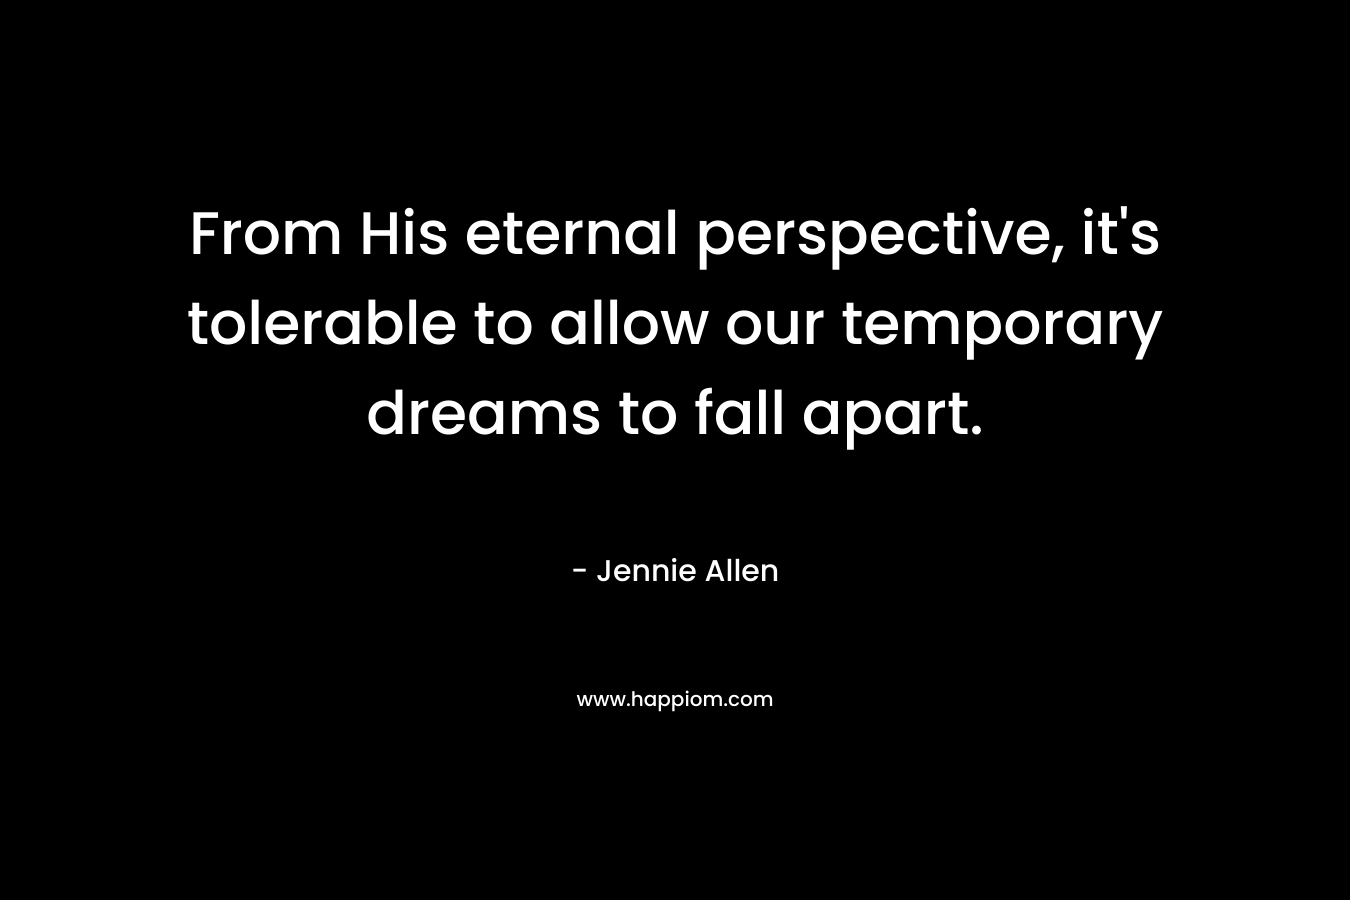 From His eternal perspective, it's tolerable to allow our temporary dreams to fall apart.